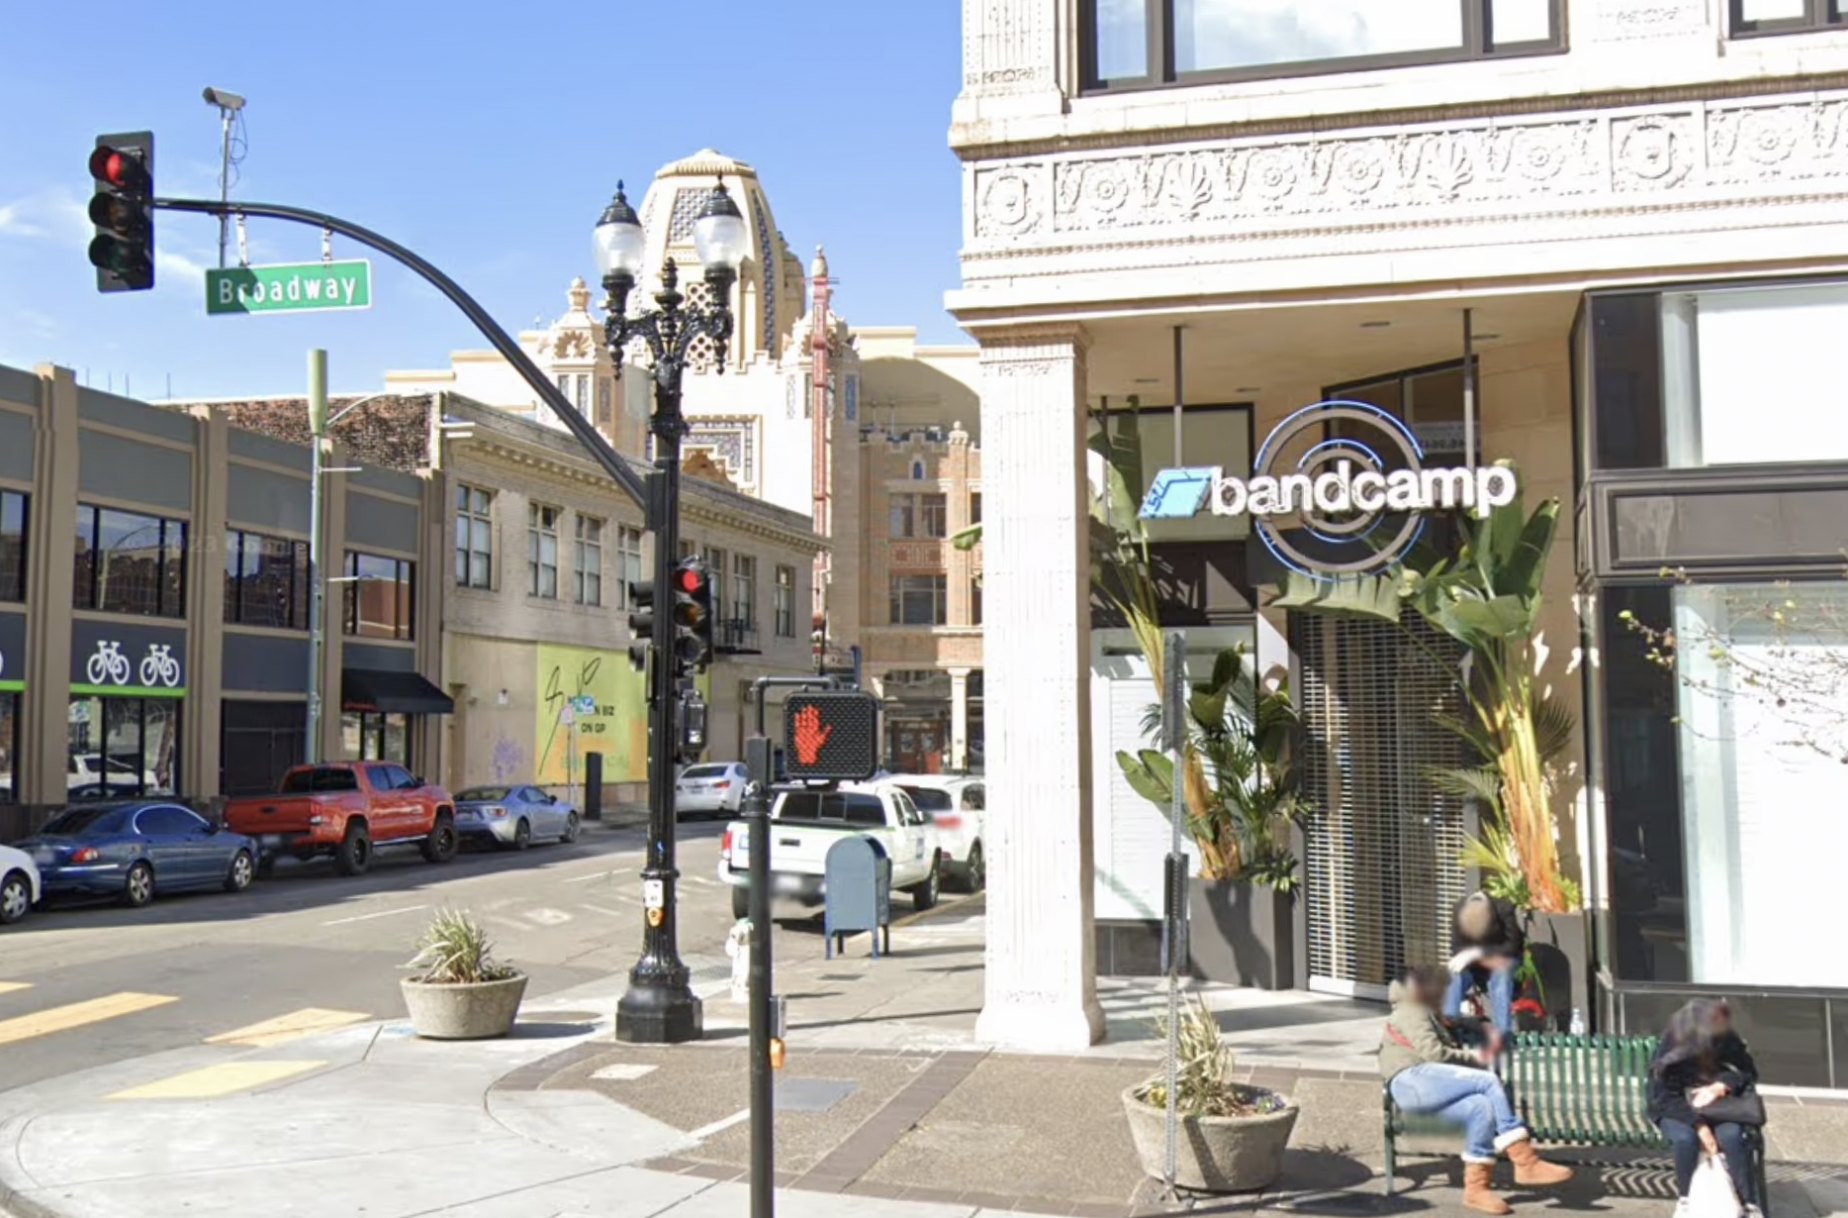 Bandcamp HQ is located in Uptown Oakland.